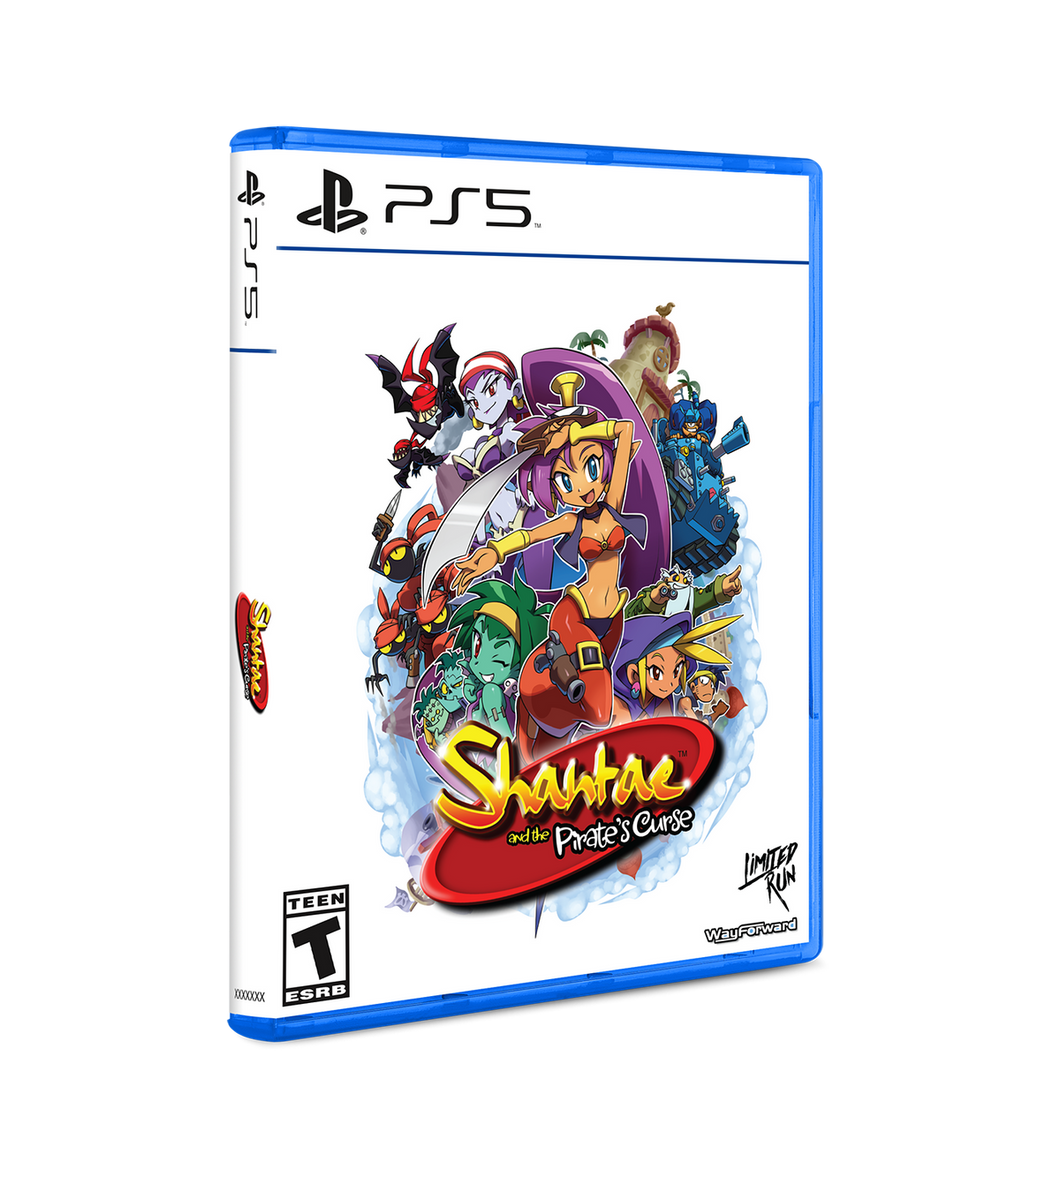 Shantae and the pirate's curse / Limited run games / PS5